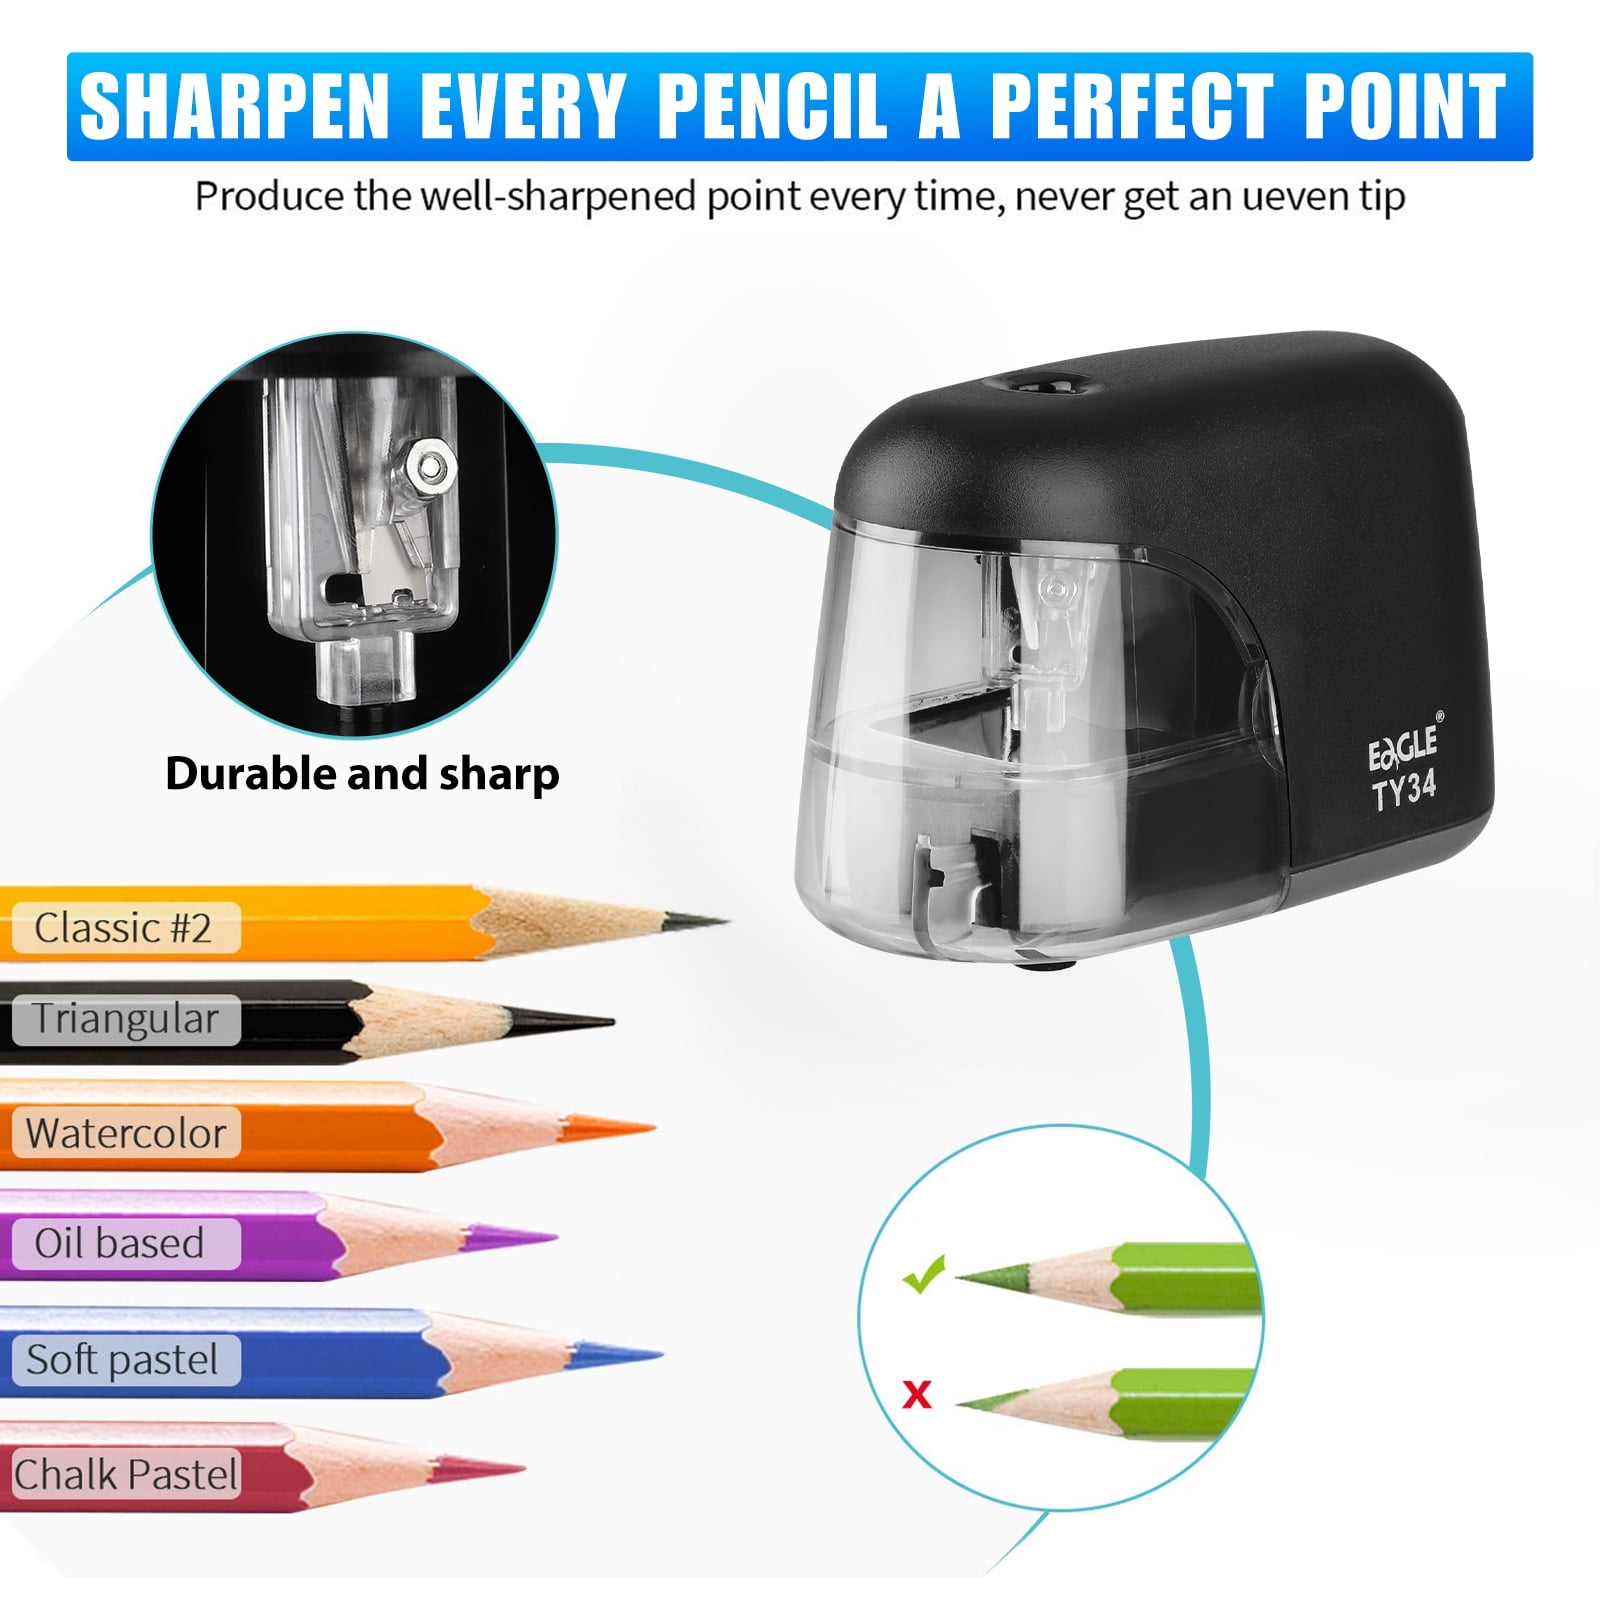 Electric Pencil Sharpener, Auto Stop Pencil Sharpener for Colored Pencils,  Sharp & Fast, for 6-12mm Pencils, Pencil Sharpener Electric Plug in, Strong  Helical Blade, Ideal for Home, Classroom (White) - Yahoo Shopping